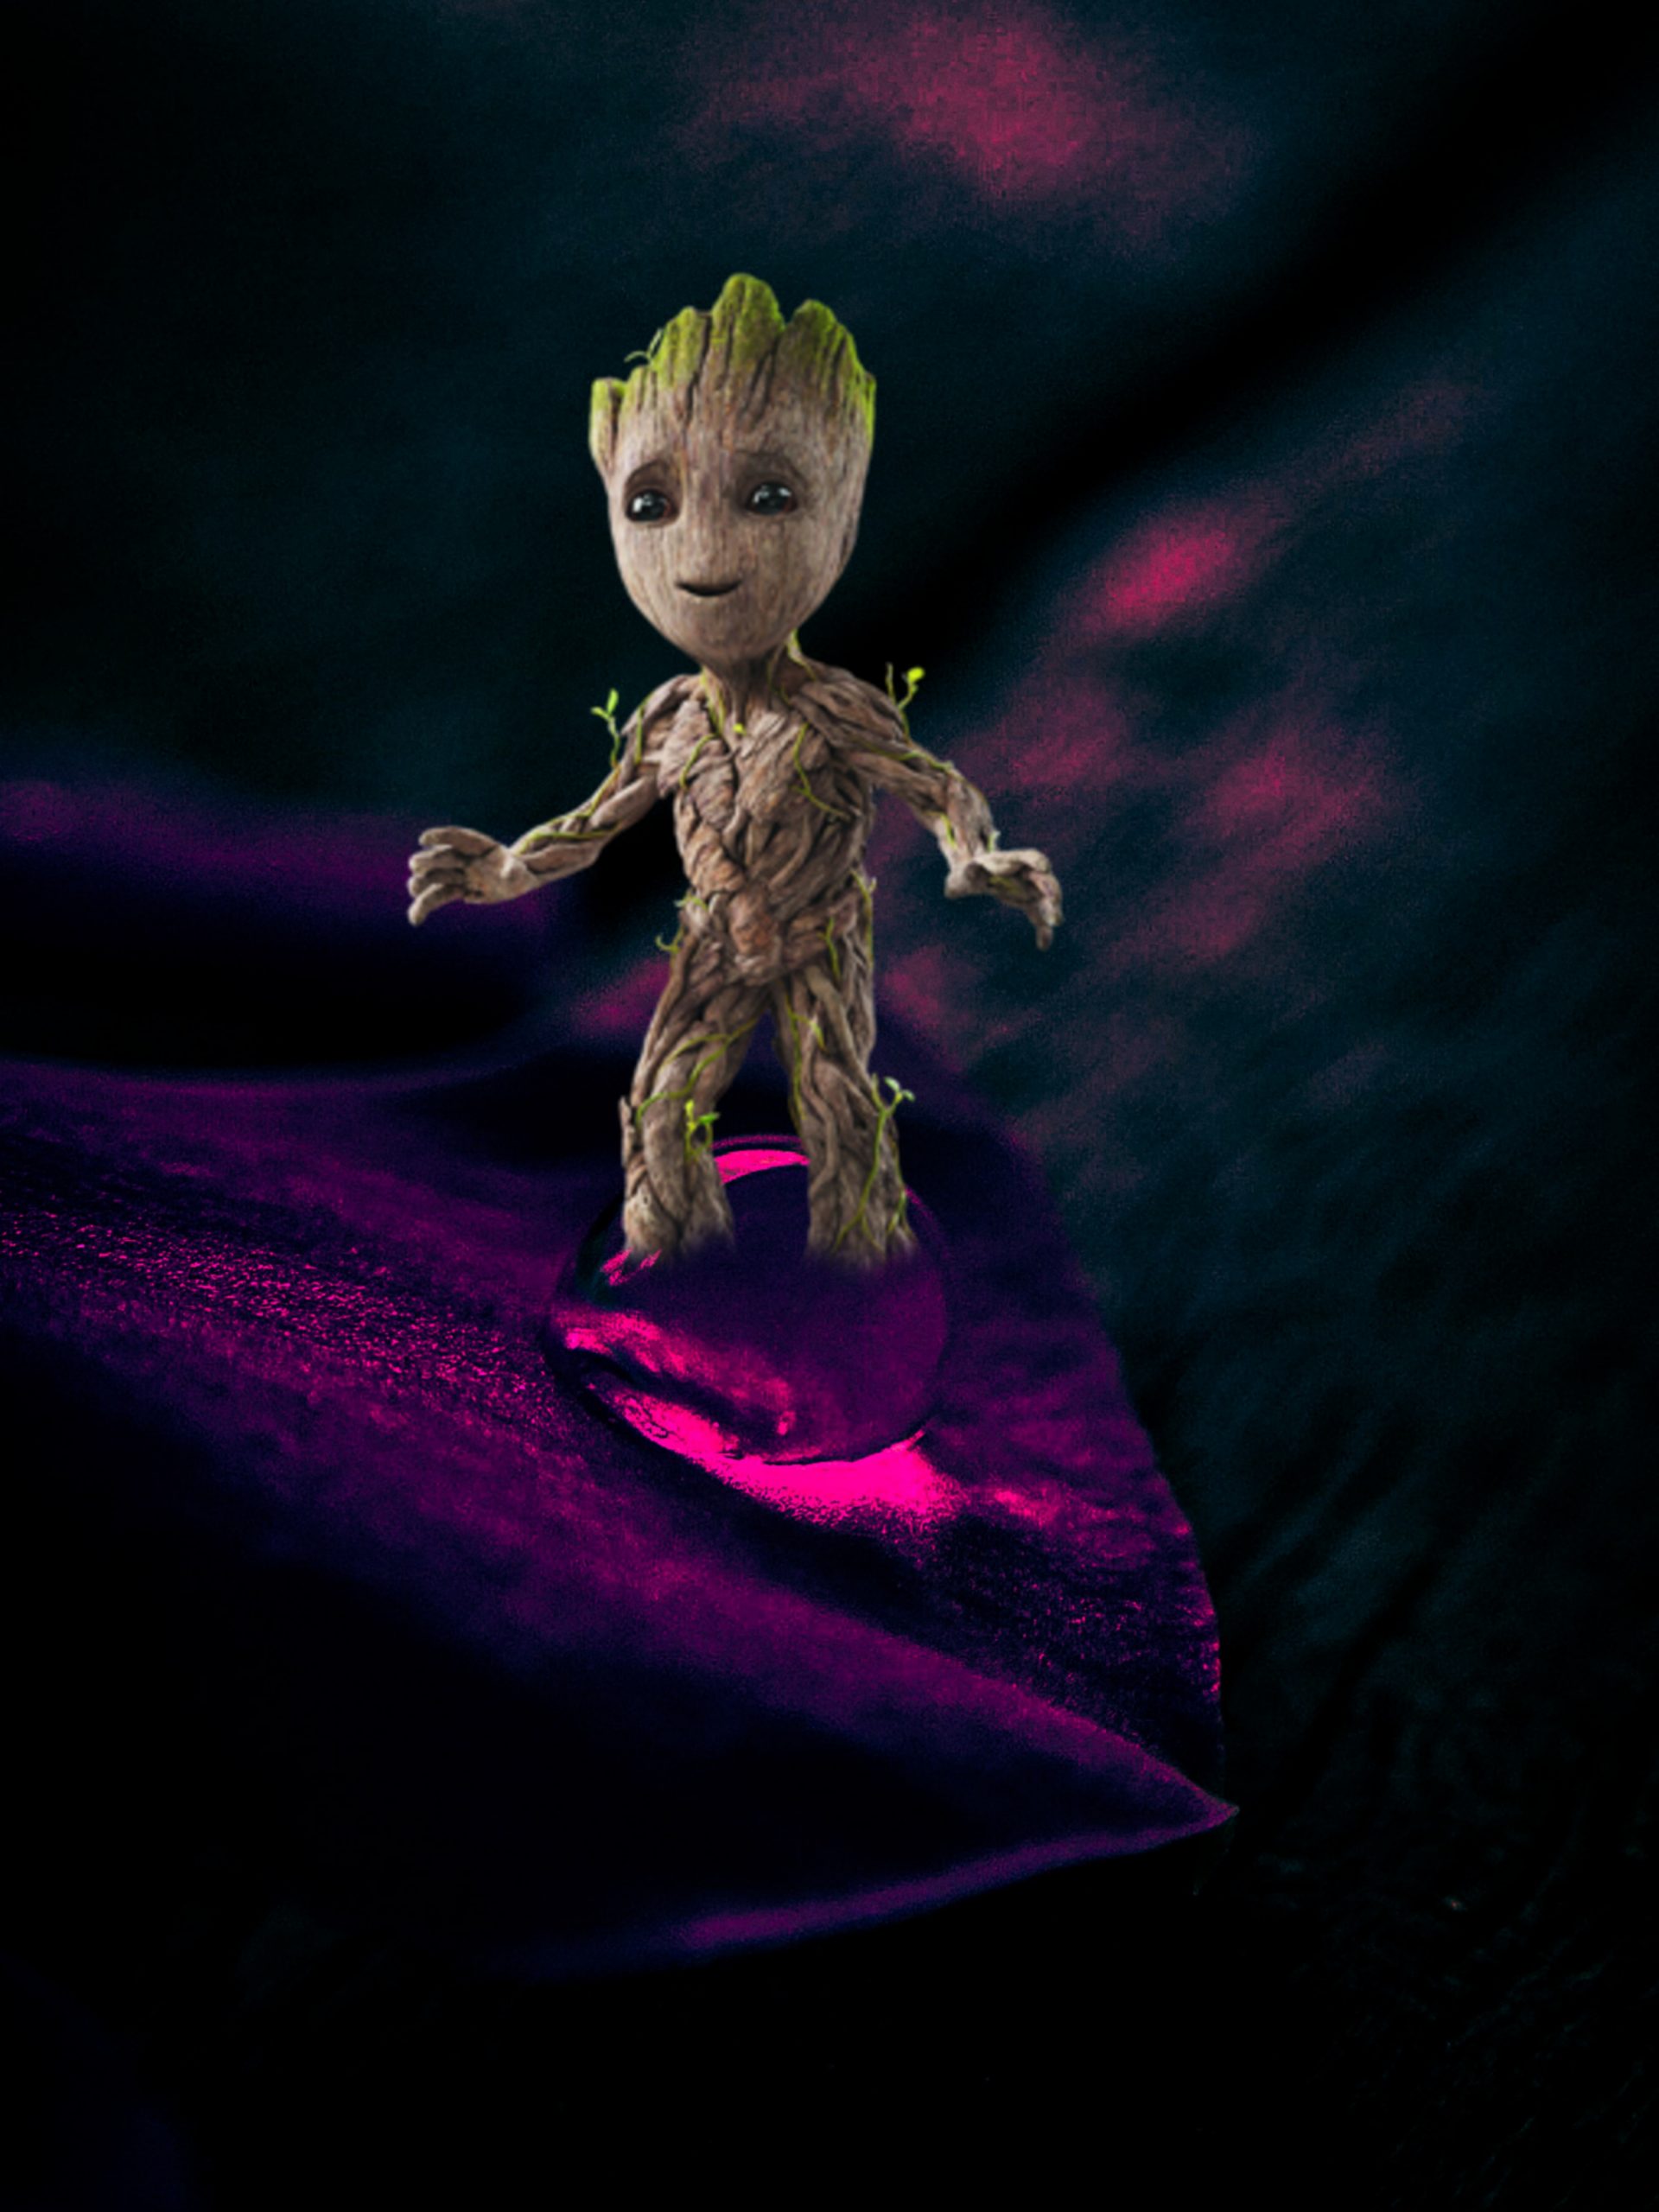 Fictional character Groot